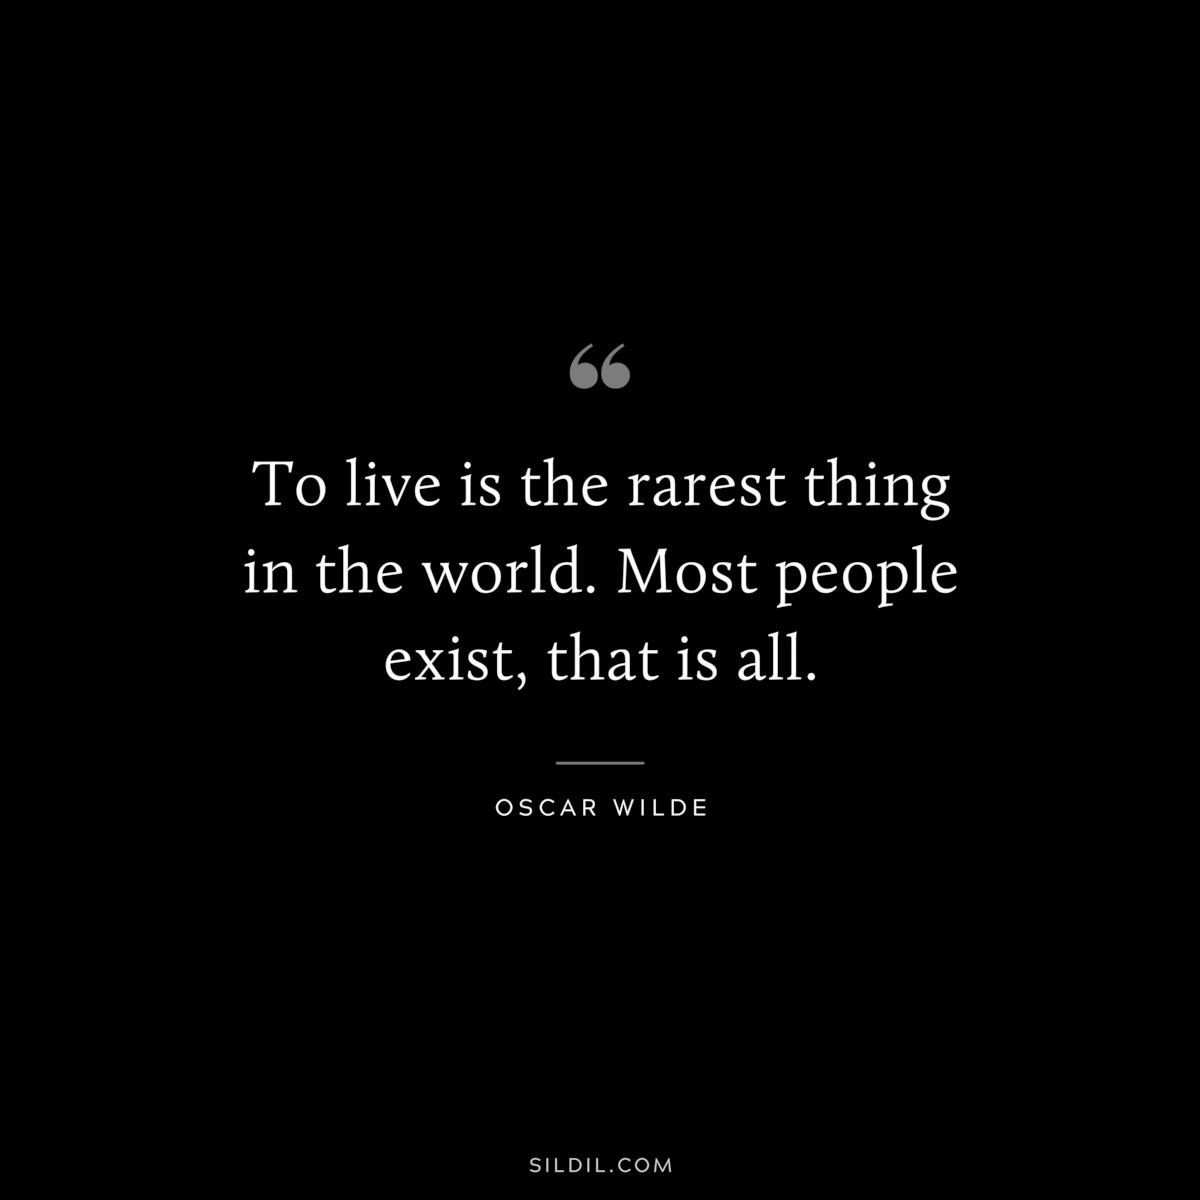 To live is the rarest thing in the world. Most people exist, that is all. ― Oscar Wilde